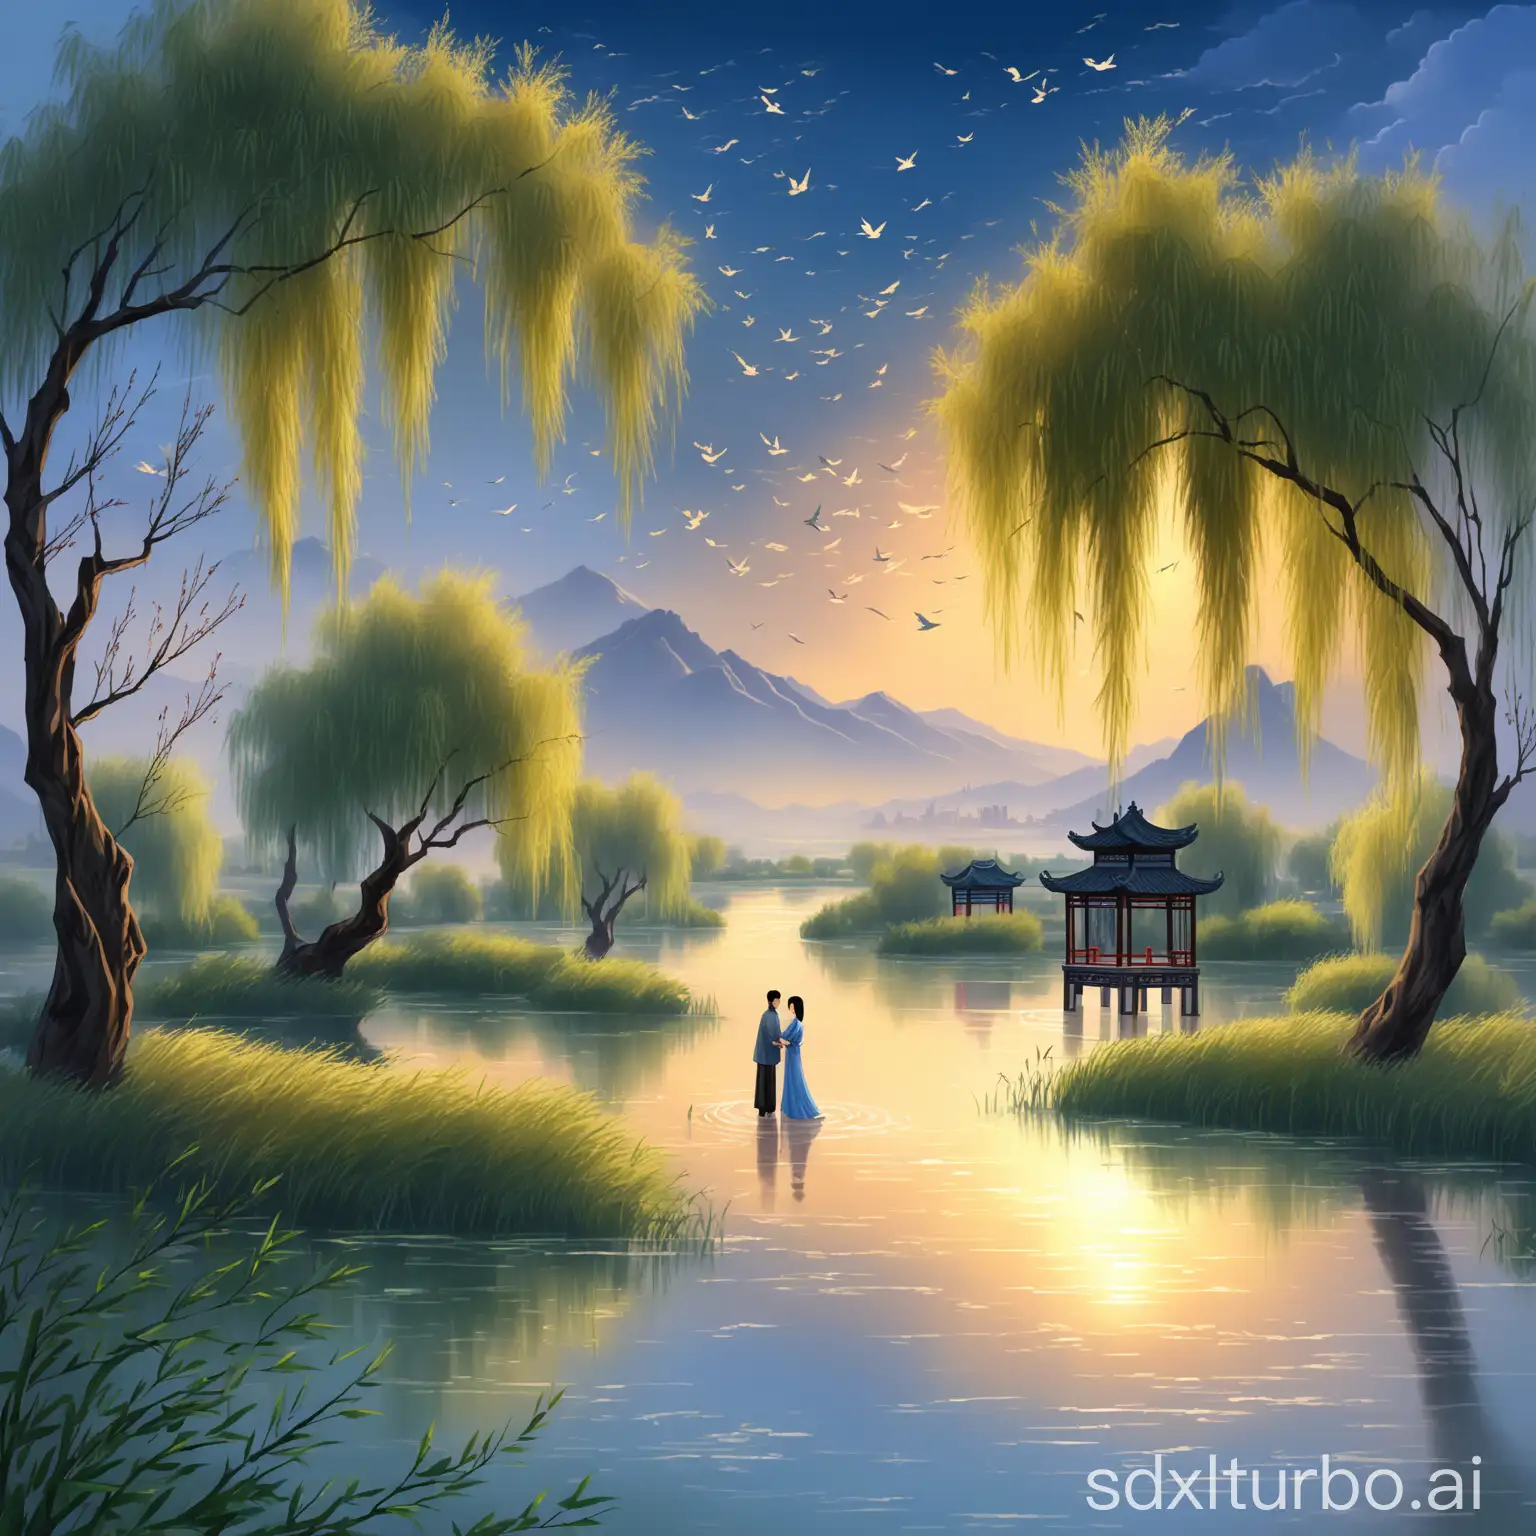 generate a romantic and beautiful landscape of evening wind blowing through willow trees, Chinese style, beautiful sky, a distant couple meeting each other